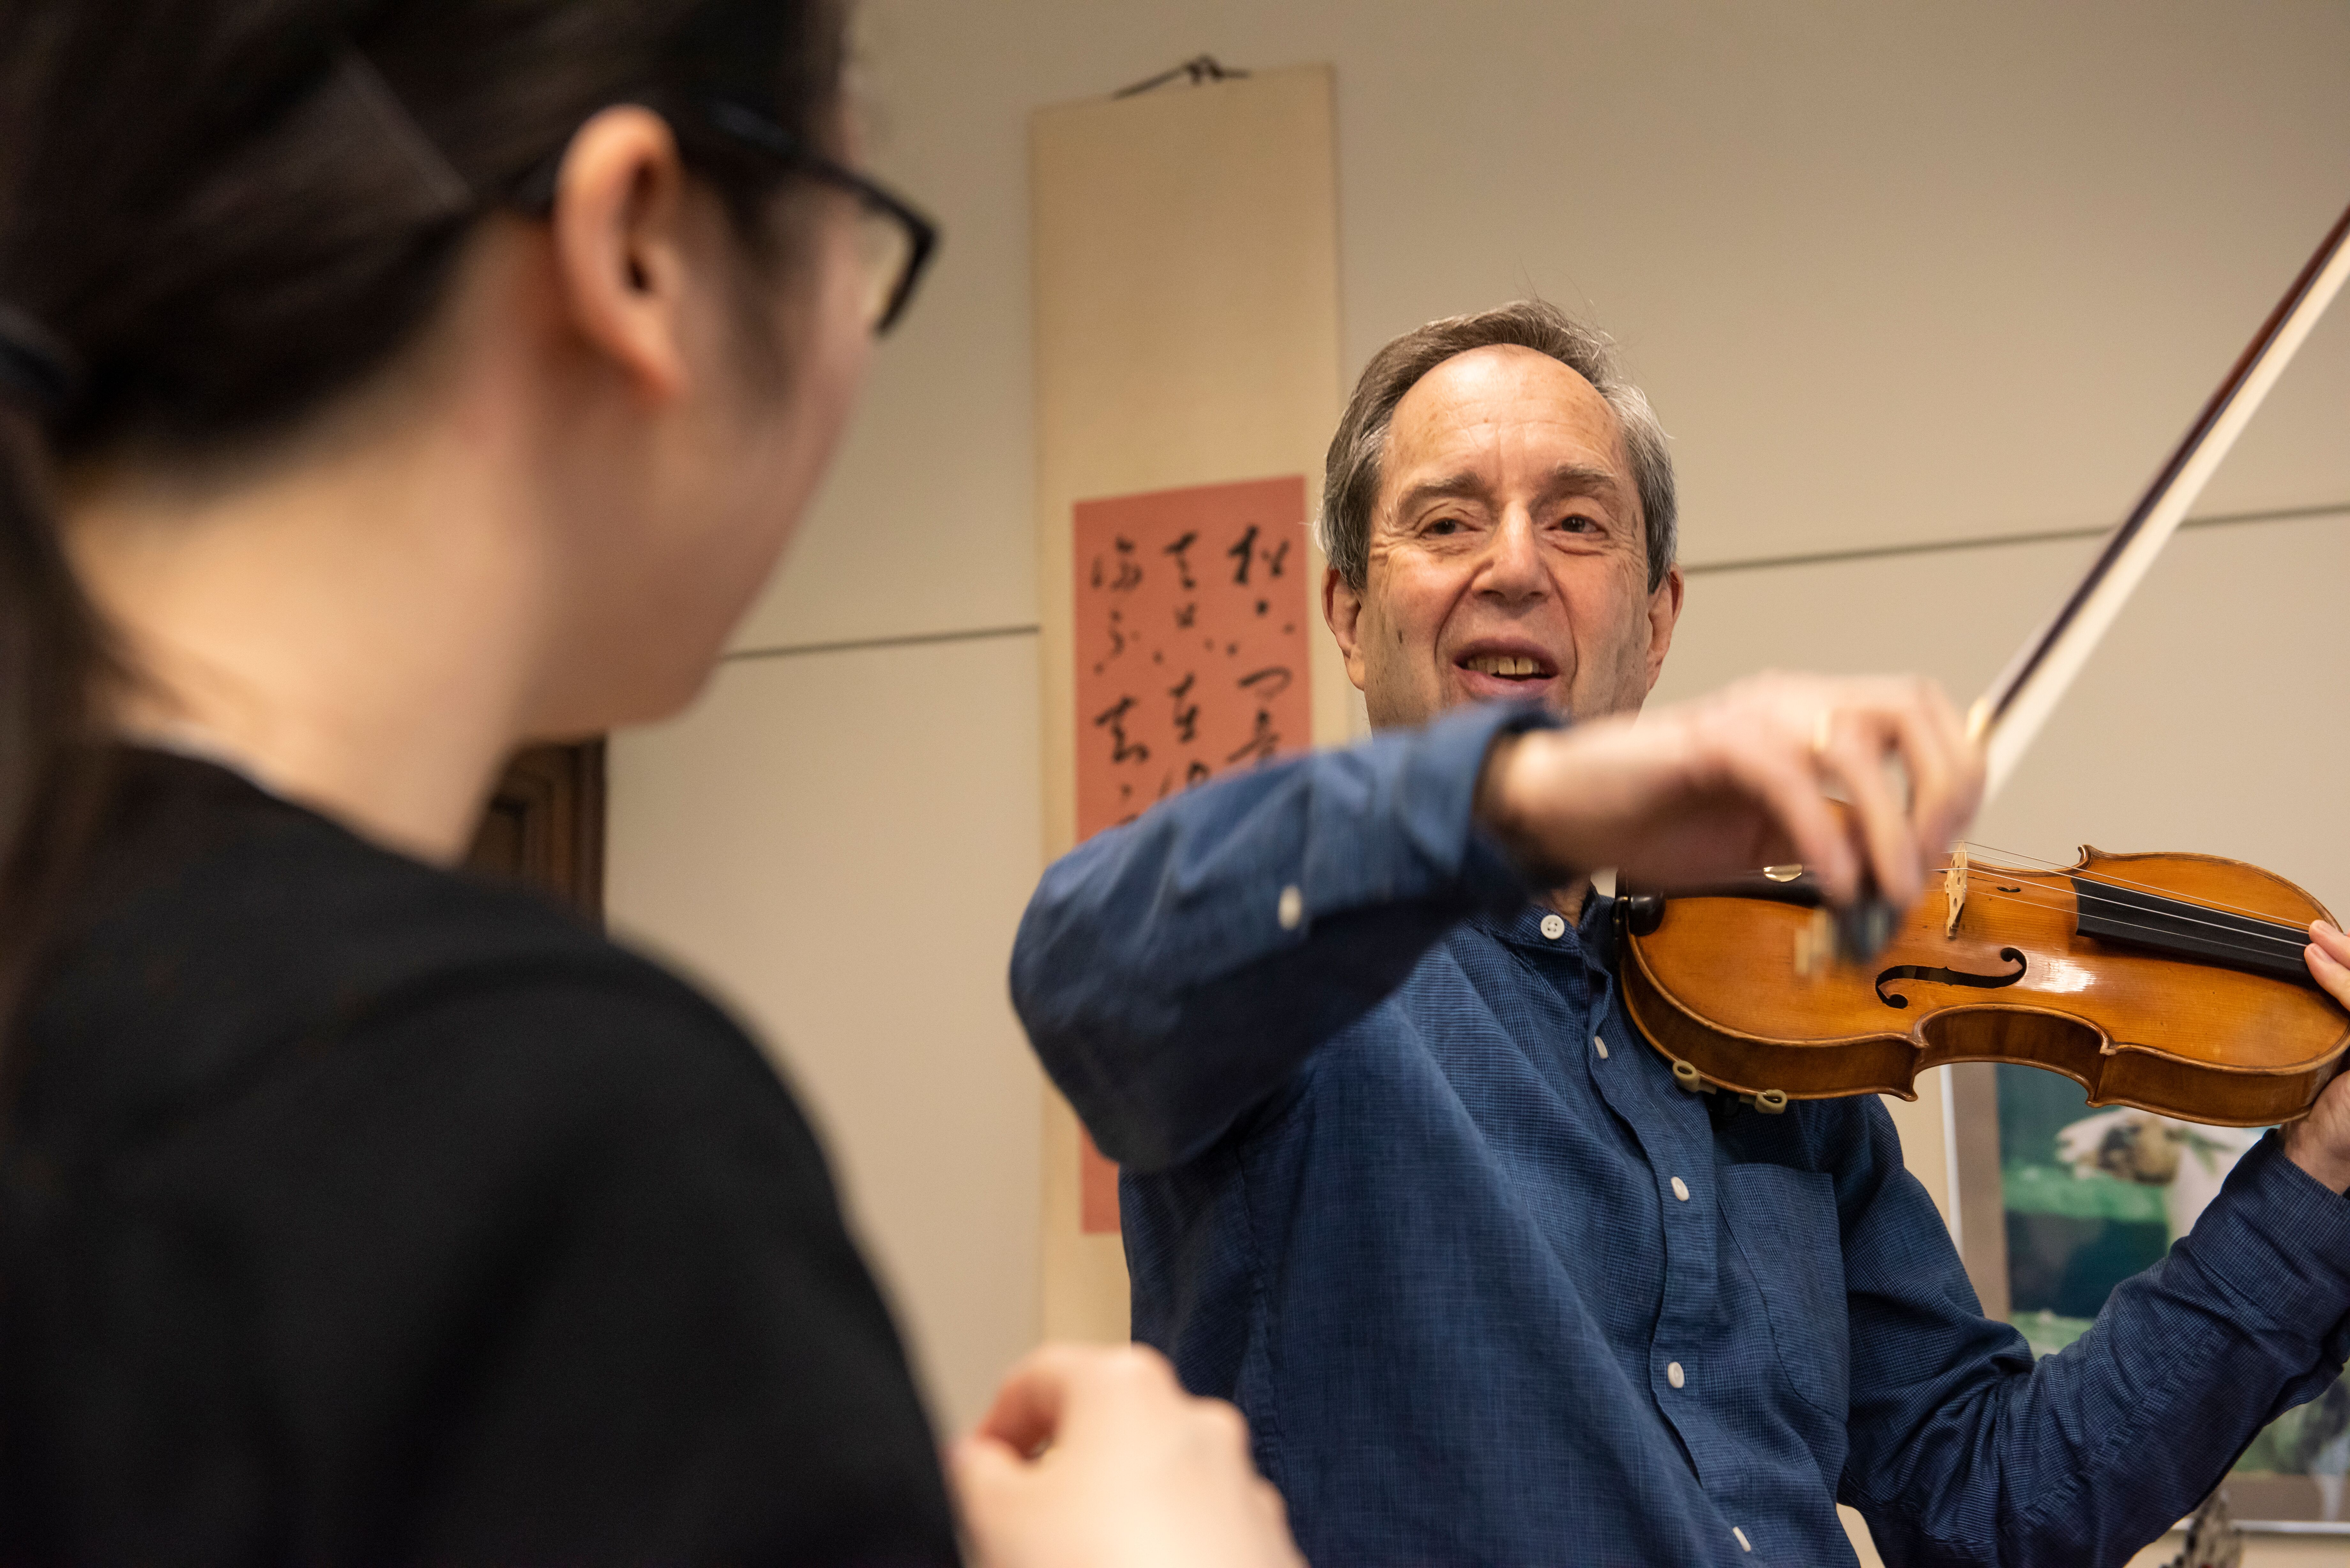 Donald Weilerstein holds his bow over his violin and smiles while teaching a student